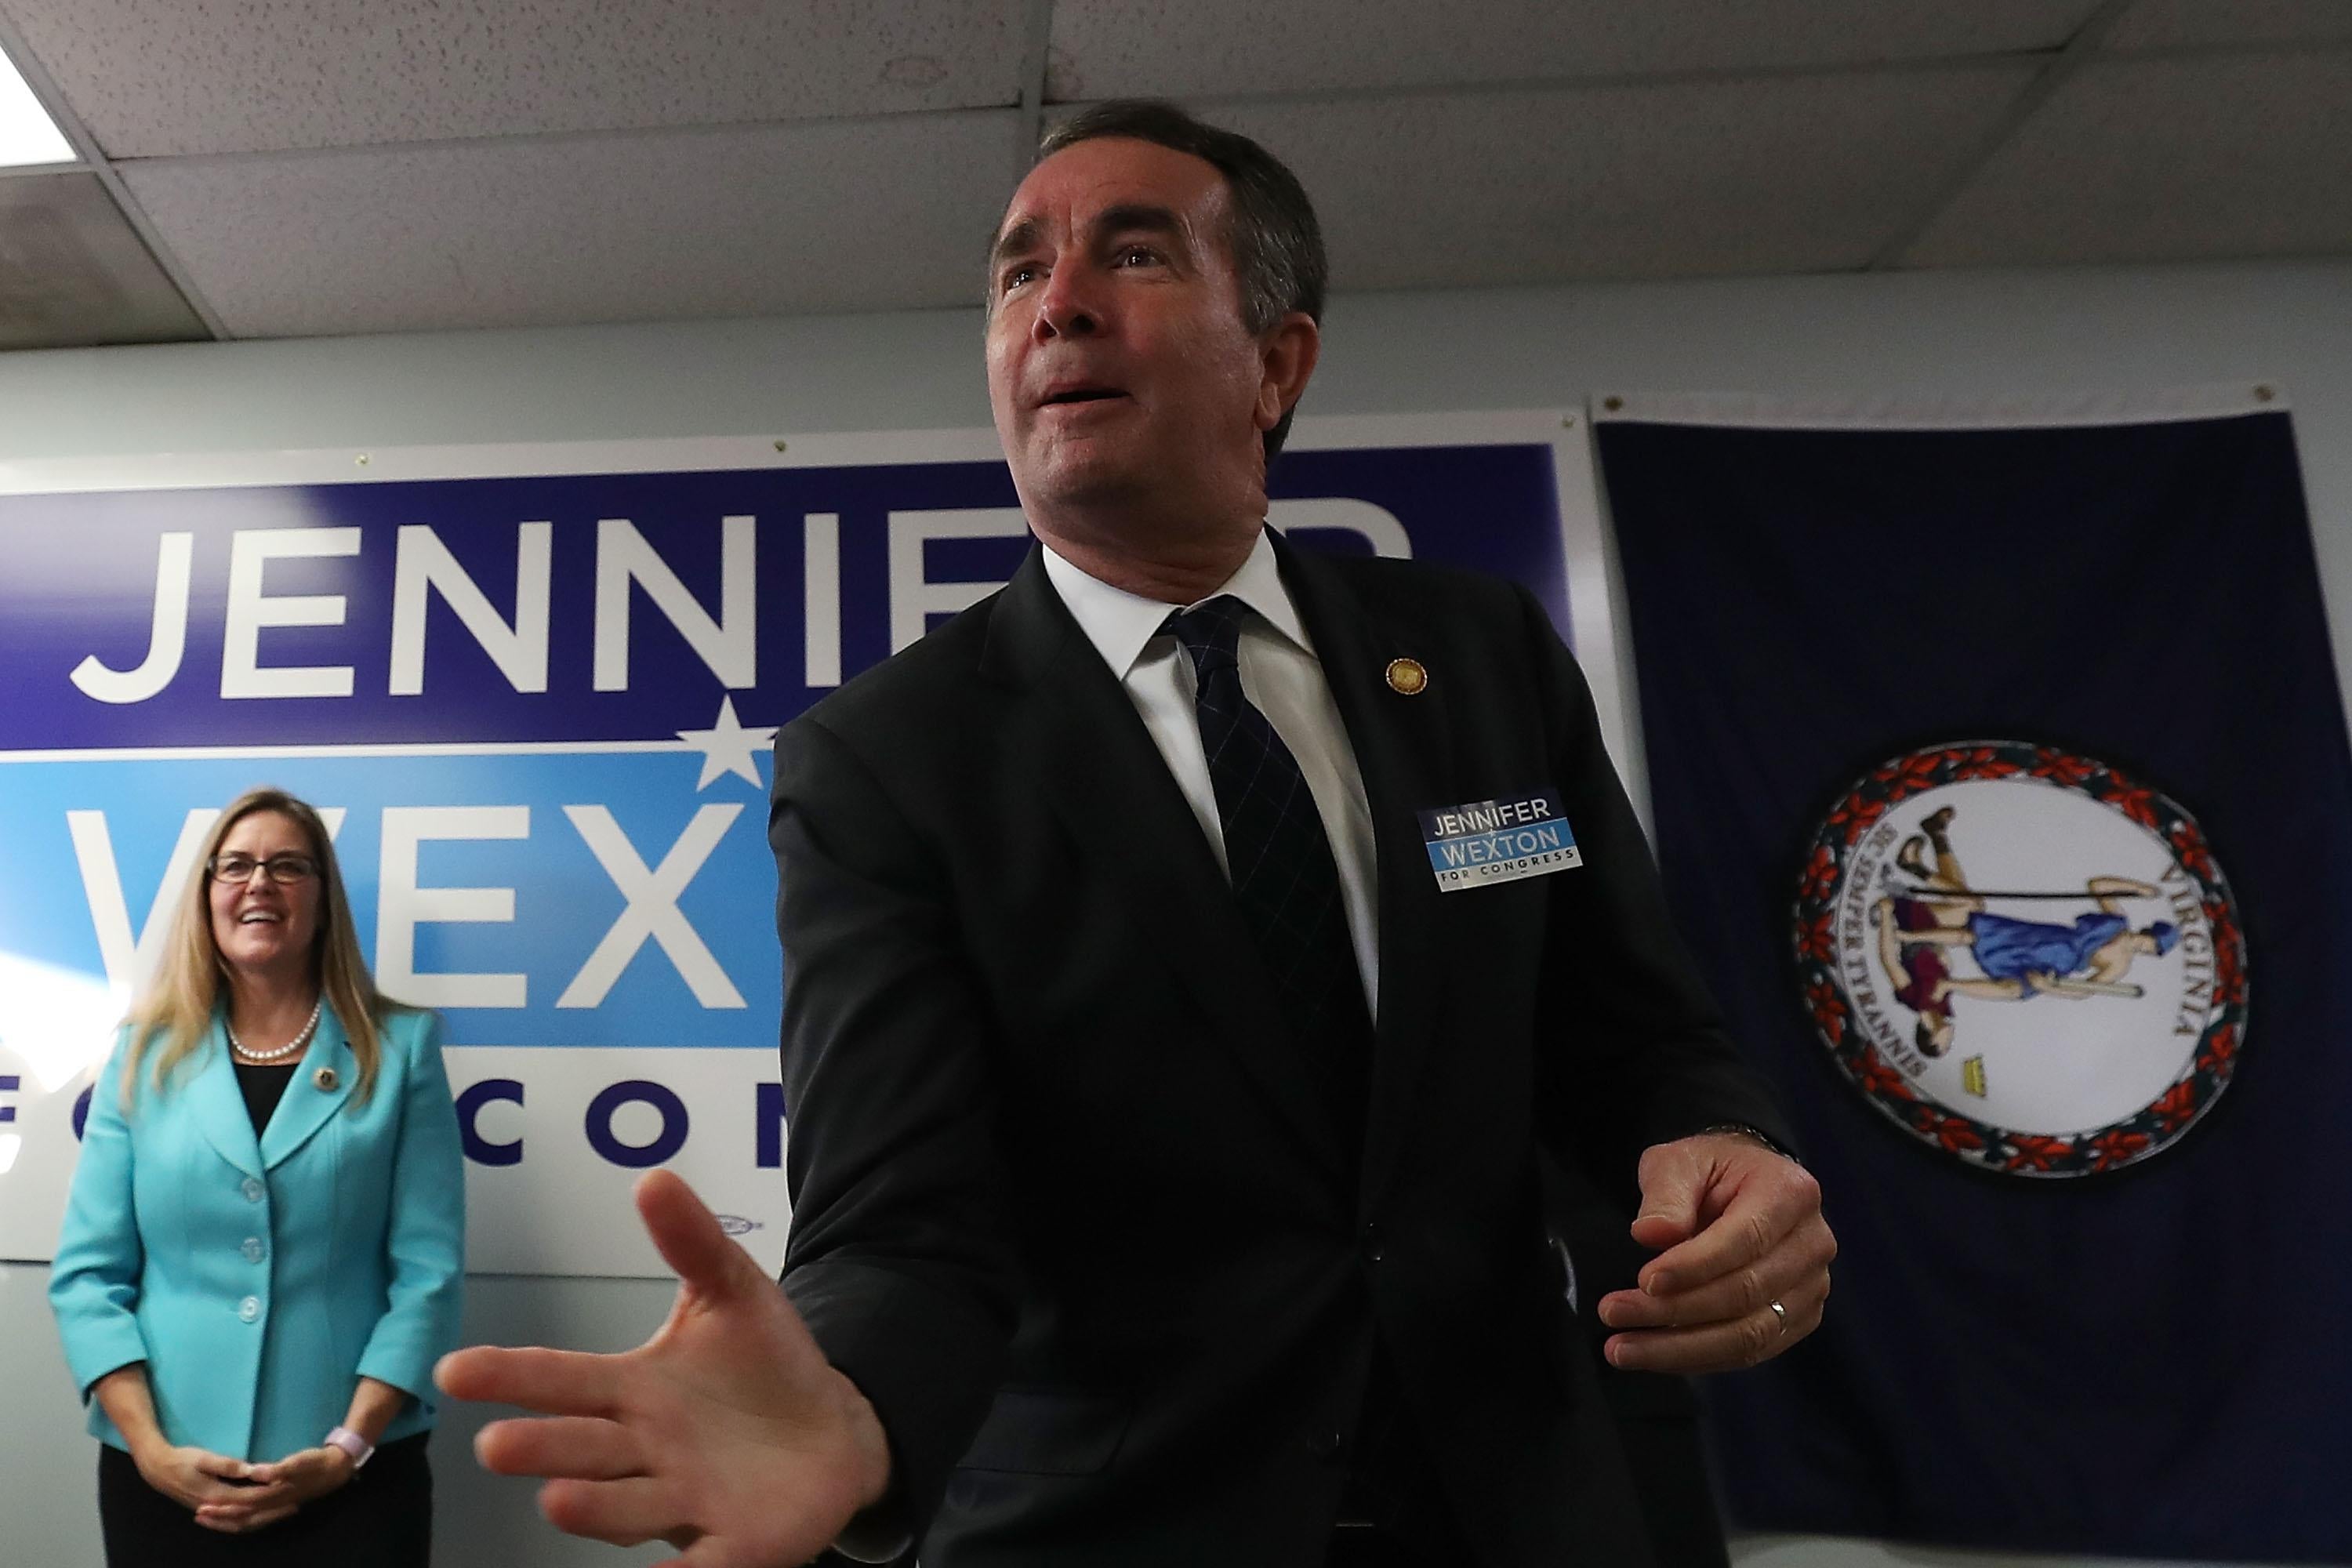 Virginia Gov. Ralph Northam speaks while flanked by Virginia State Senator and candidate for the U.S. House of Representatives Jennifer Wexton during a rally at the Wexton campaign headquarters on October 30, 2018 in Sterling, Virginia.